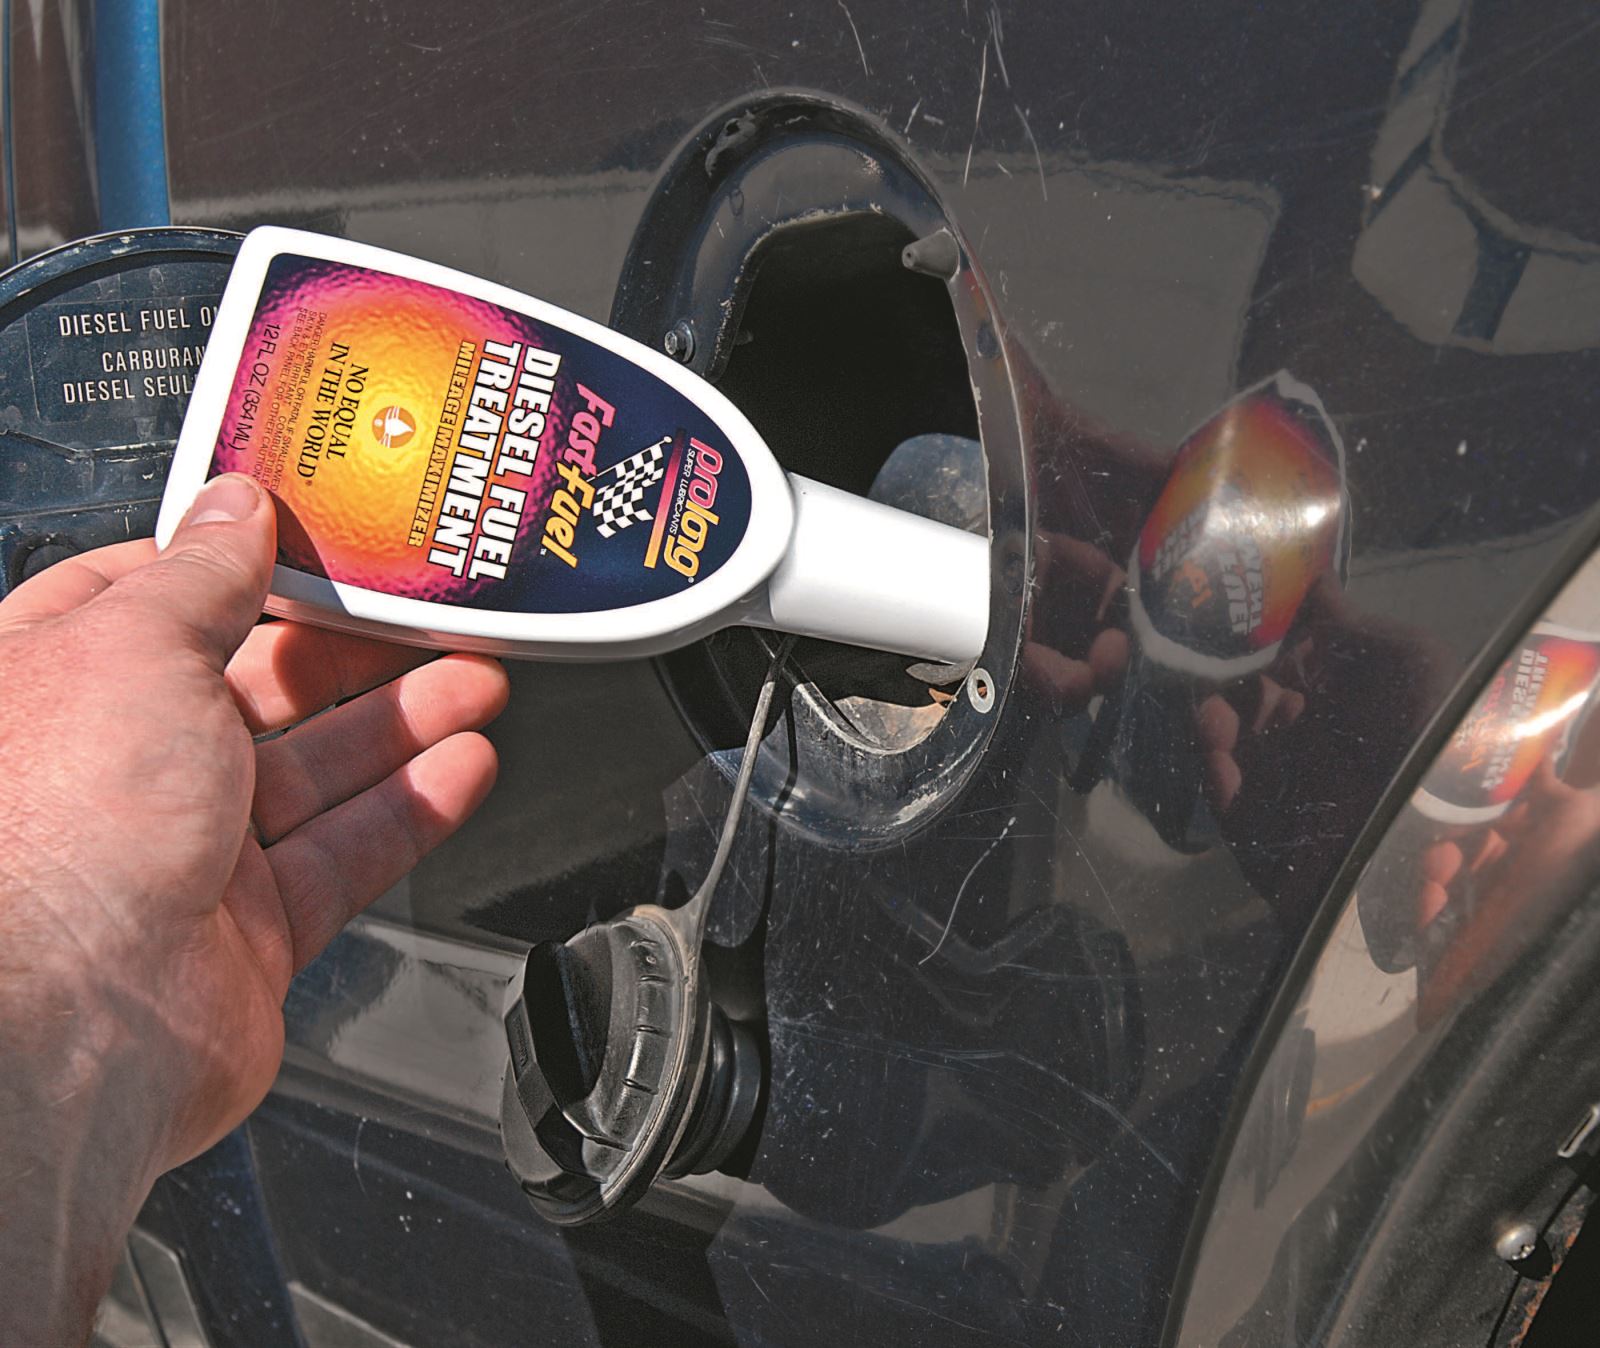 Fuel Additives What's in your truck?